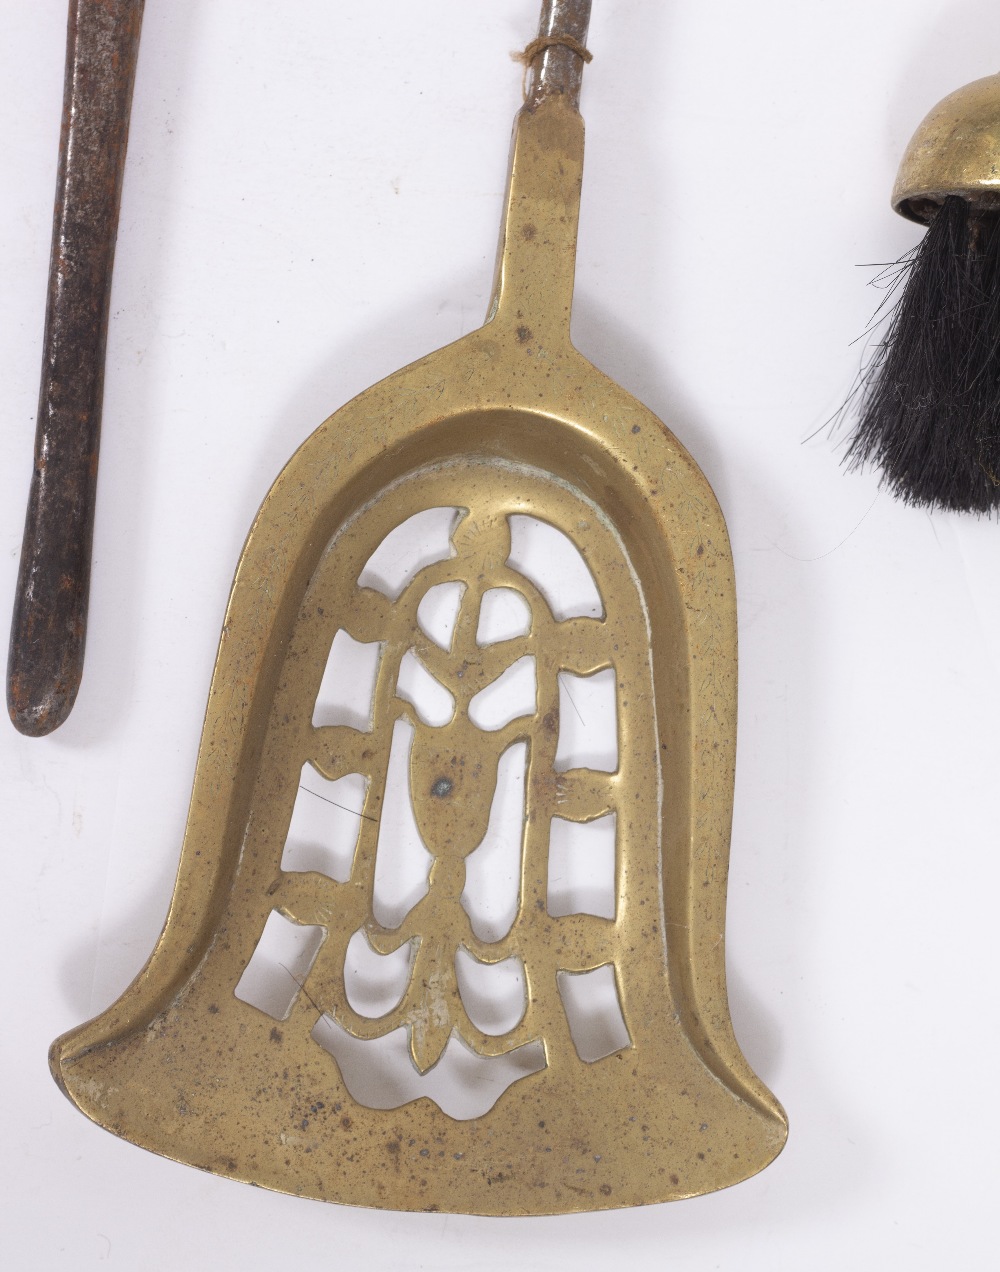 A MATCHED GROUP OF FOUR 19TH CENTURY STEEL AND BRASS FIRE IRONS to include a shovel, poker, - Image 4 of 5